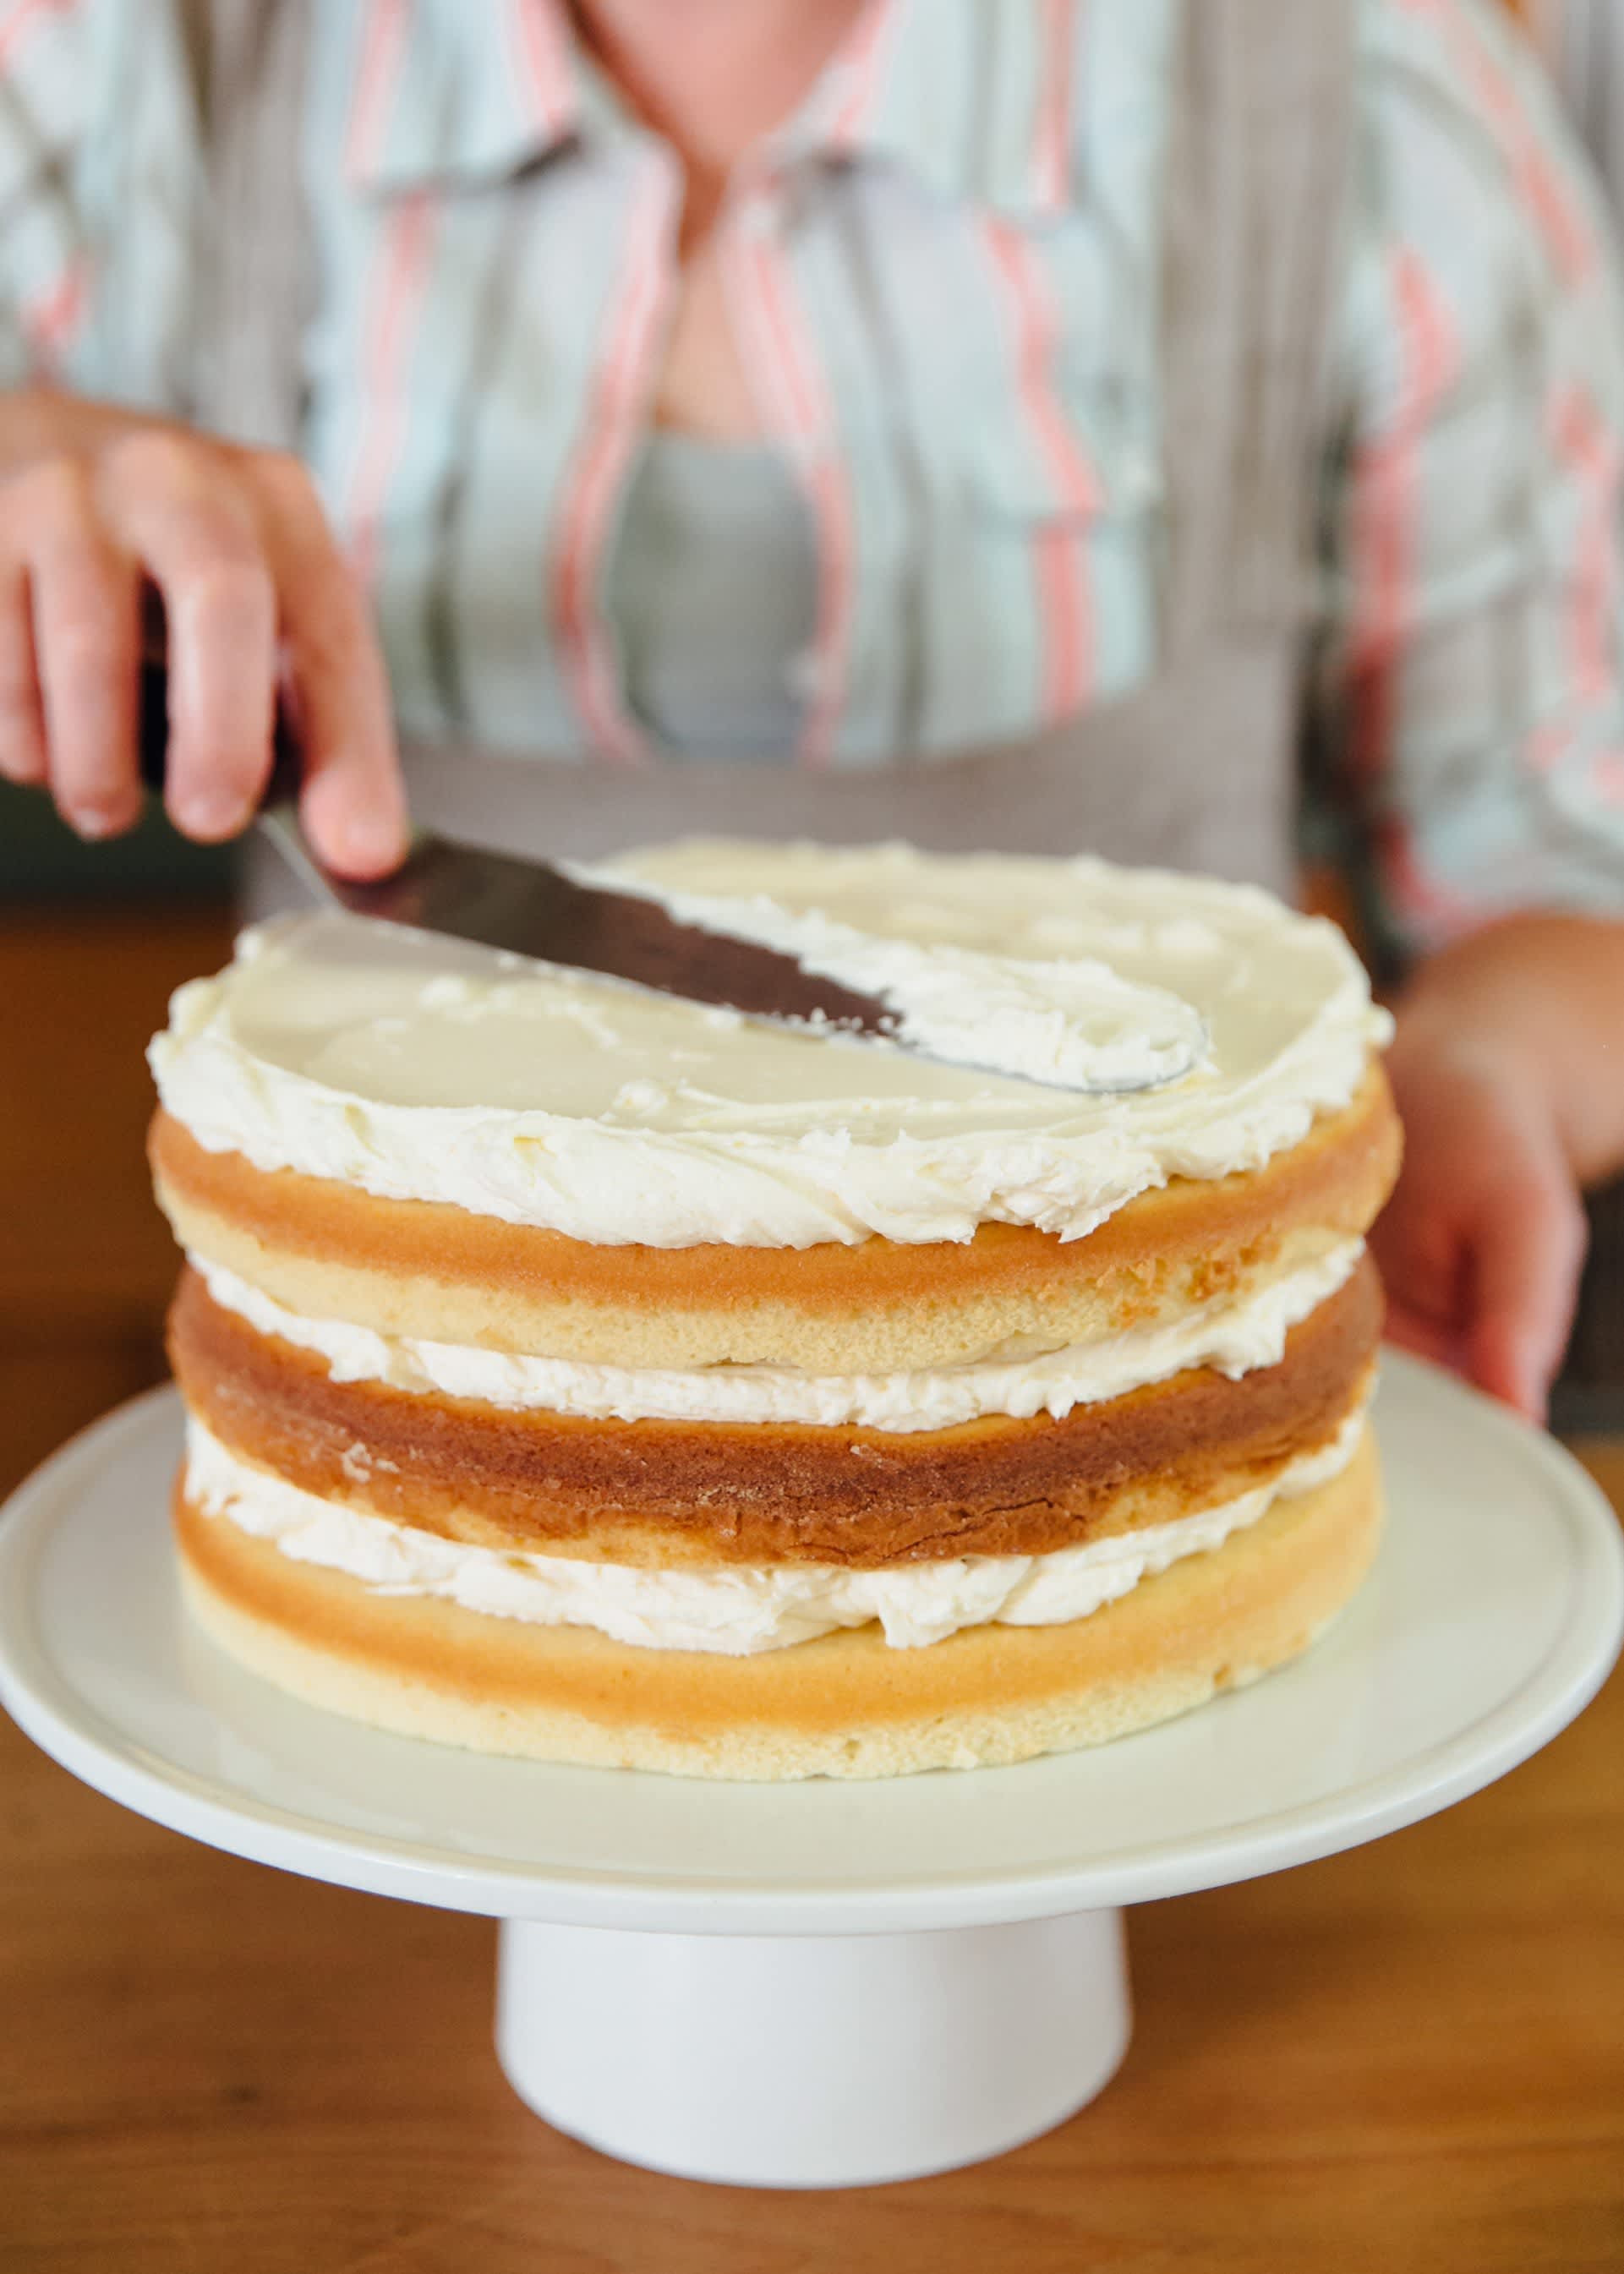 How To Frost Decorate A Layer Cake Kitchn